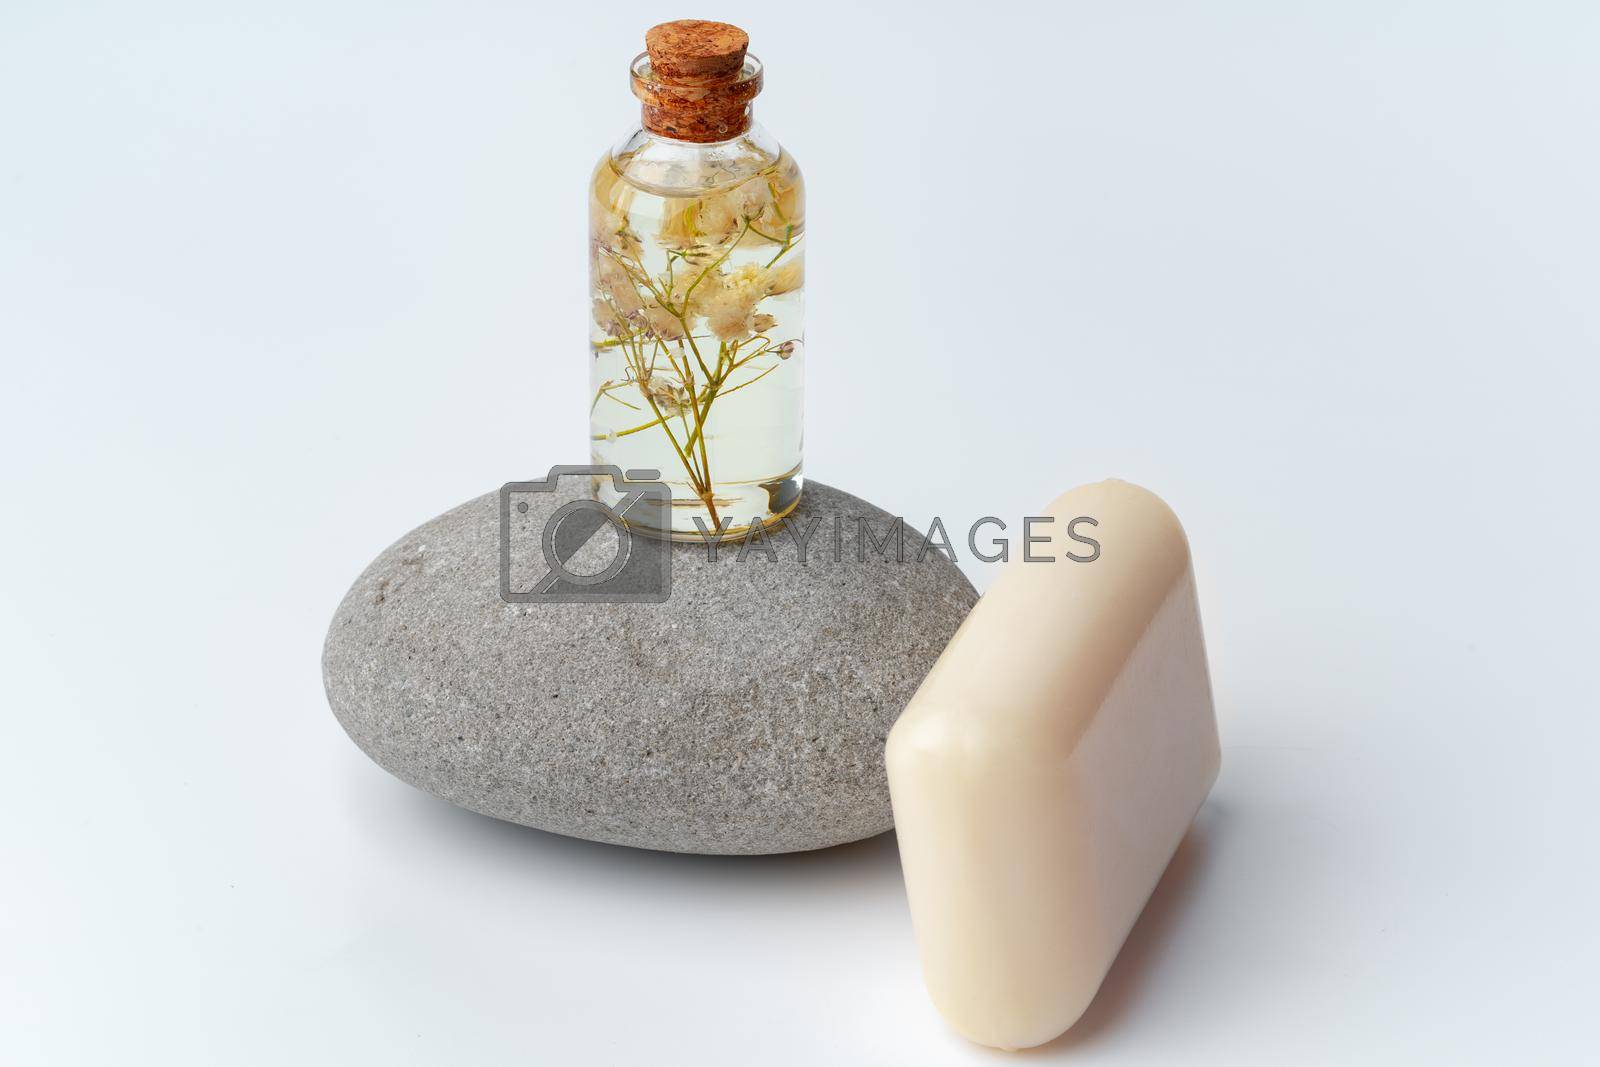 Spa stones and soap on white background, close up